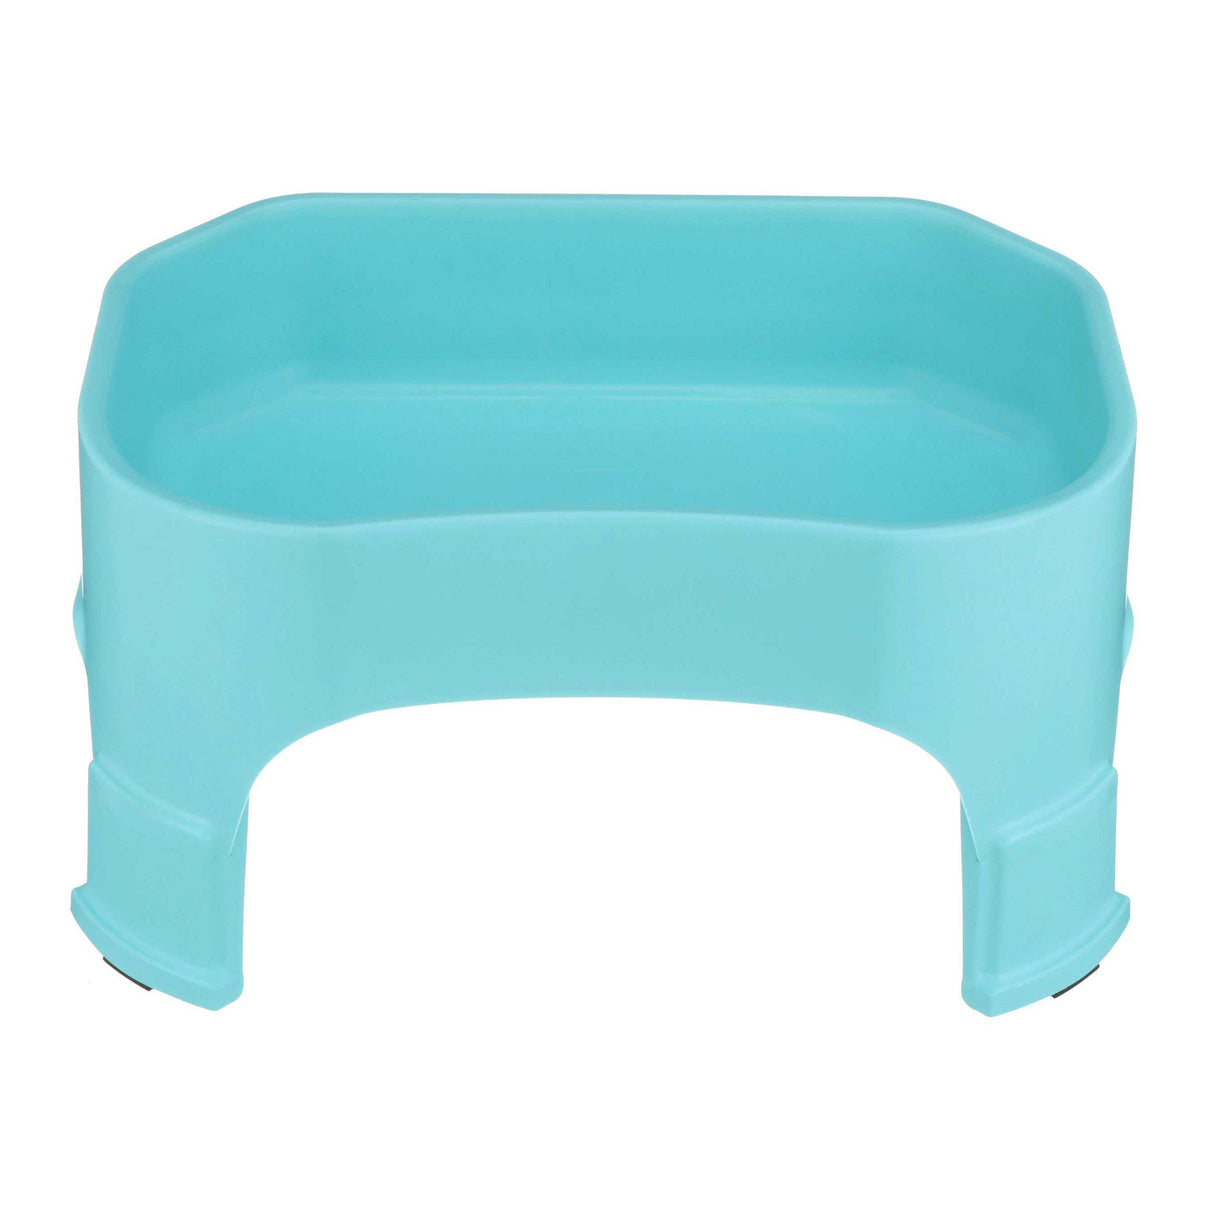 Giant Bowl in Aqua with leg extensions